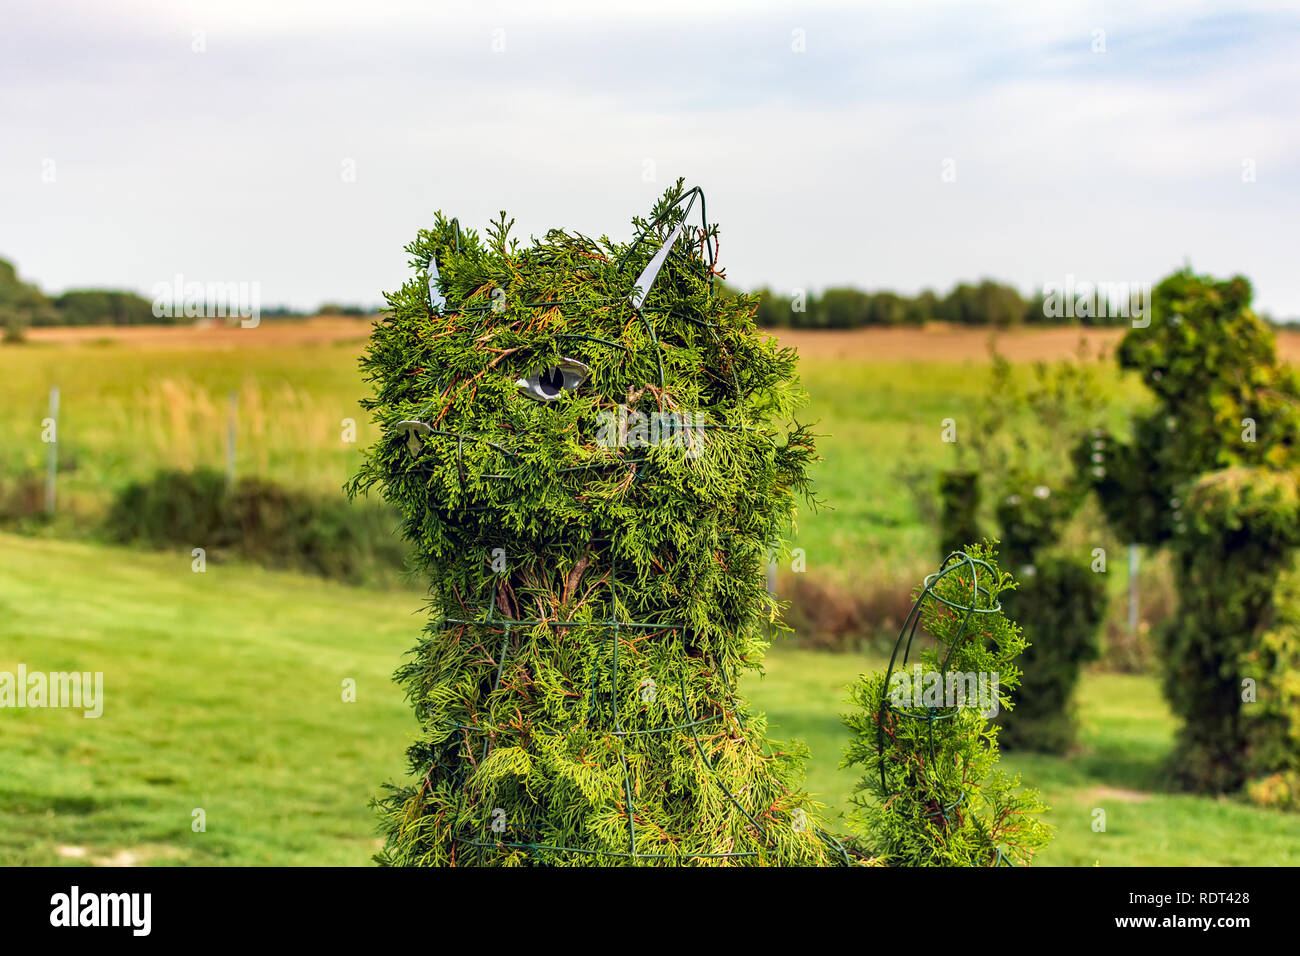 Anyksciai, Lithuania - September 8, 2018: Cat head shaped bush with Bear family in the background in a topiary garden. Green cat figure made of arborv Stock Photo